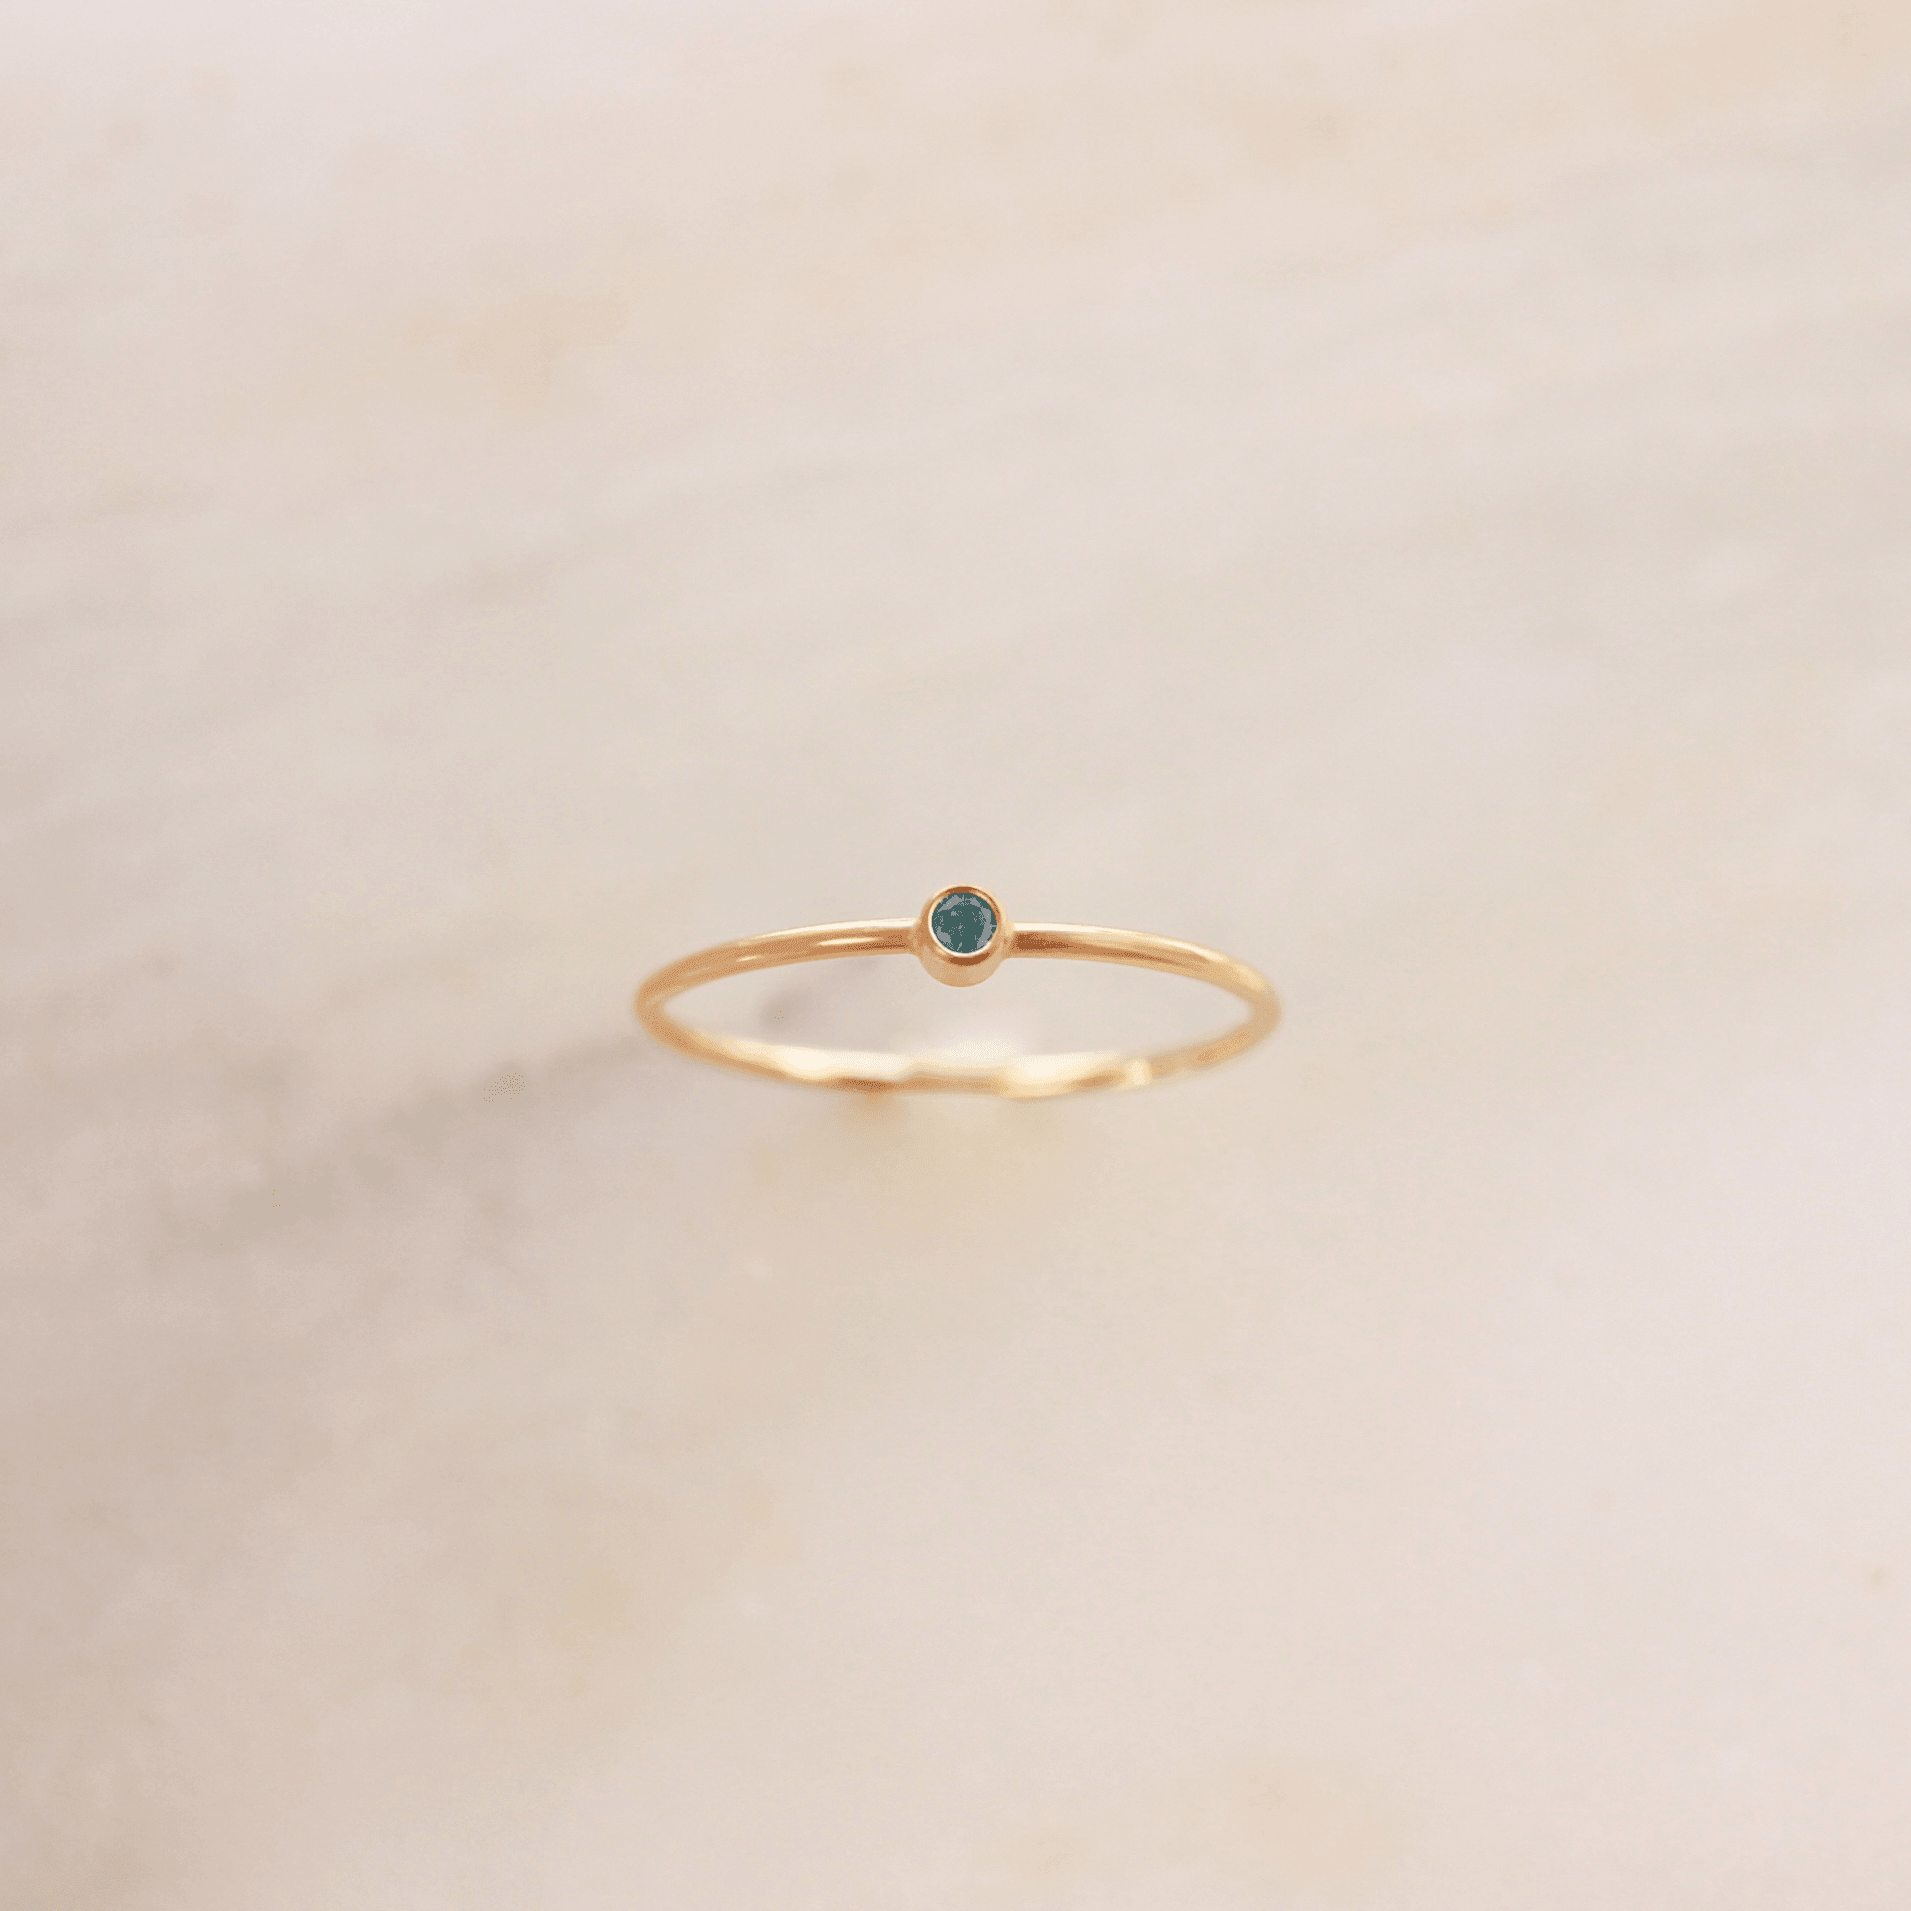 Tiny December Birthstone Ring ∙ Blue Zircon - Nolia Jewelry - Meaningful + Sustainably Handcrafted Jewelry